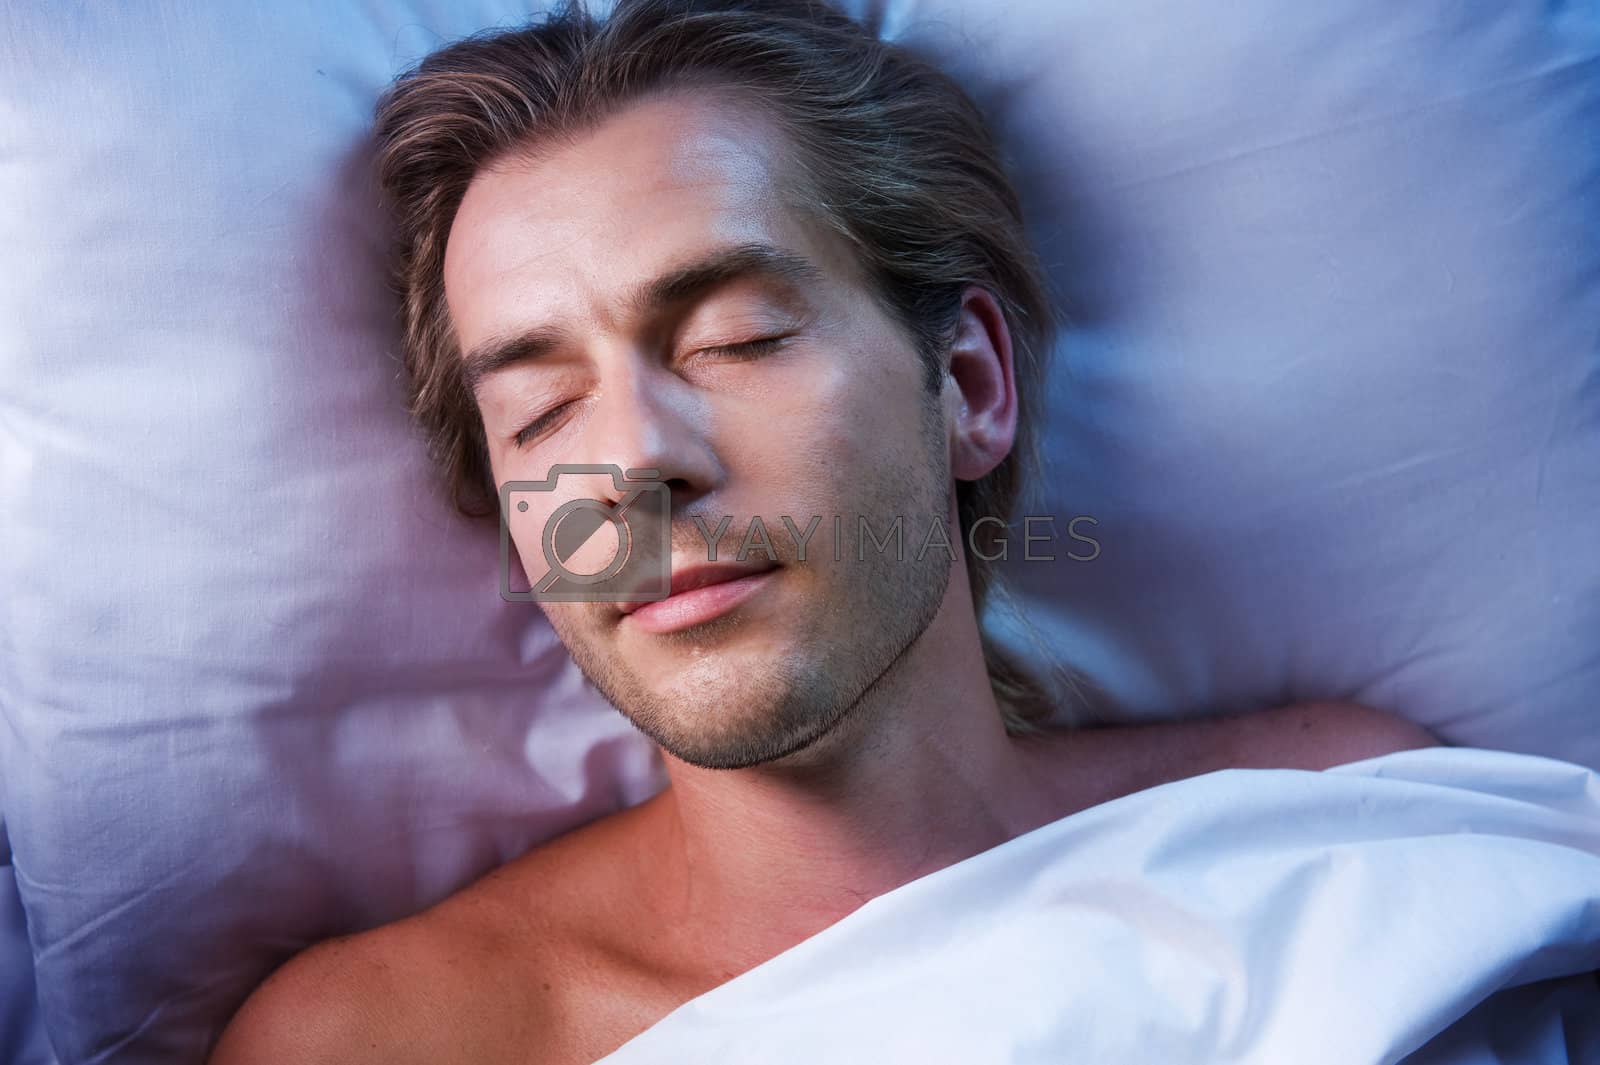 Royalty free image of Young Man Sleeping In His Bed by SubbotinaA